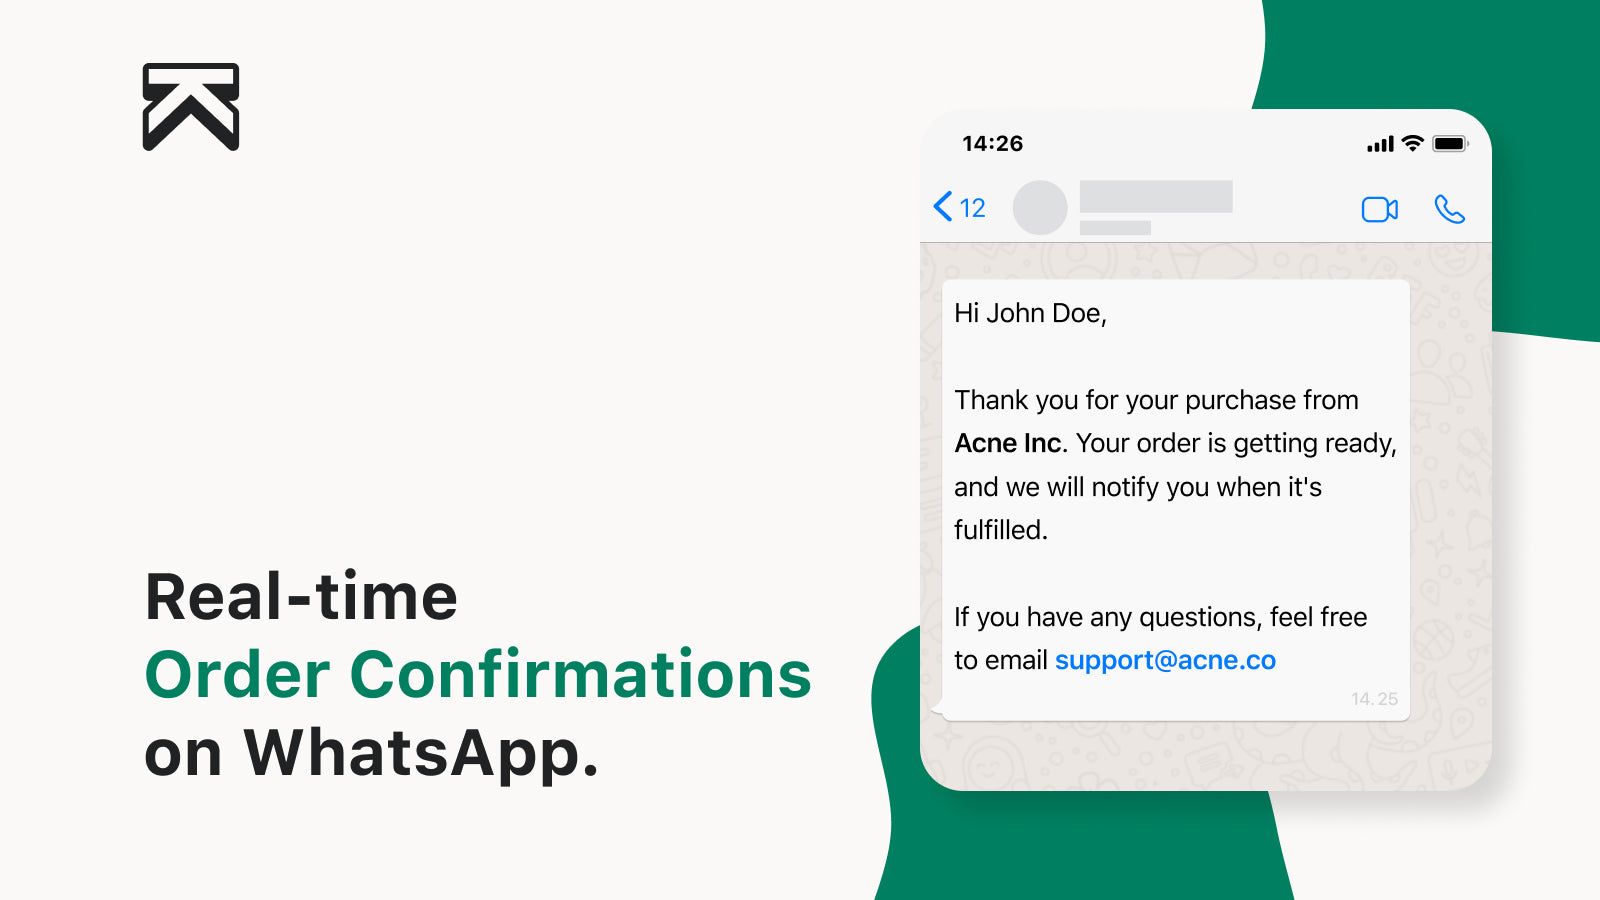 Real-time Order Confirmations on WhatsApp.